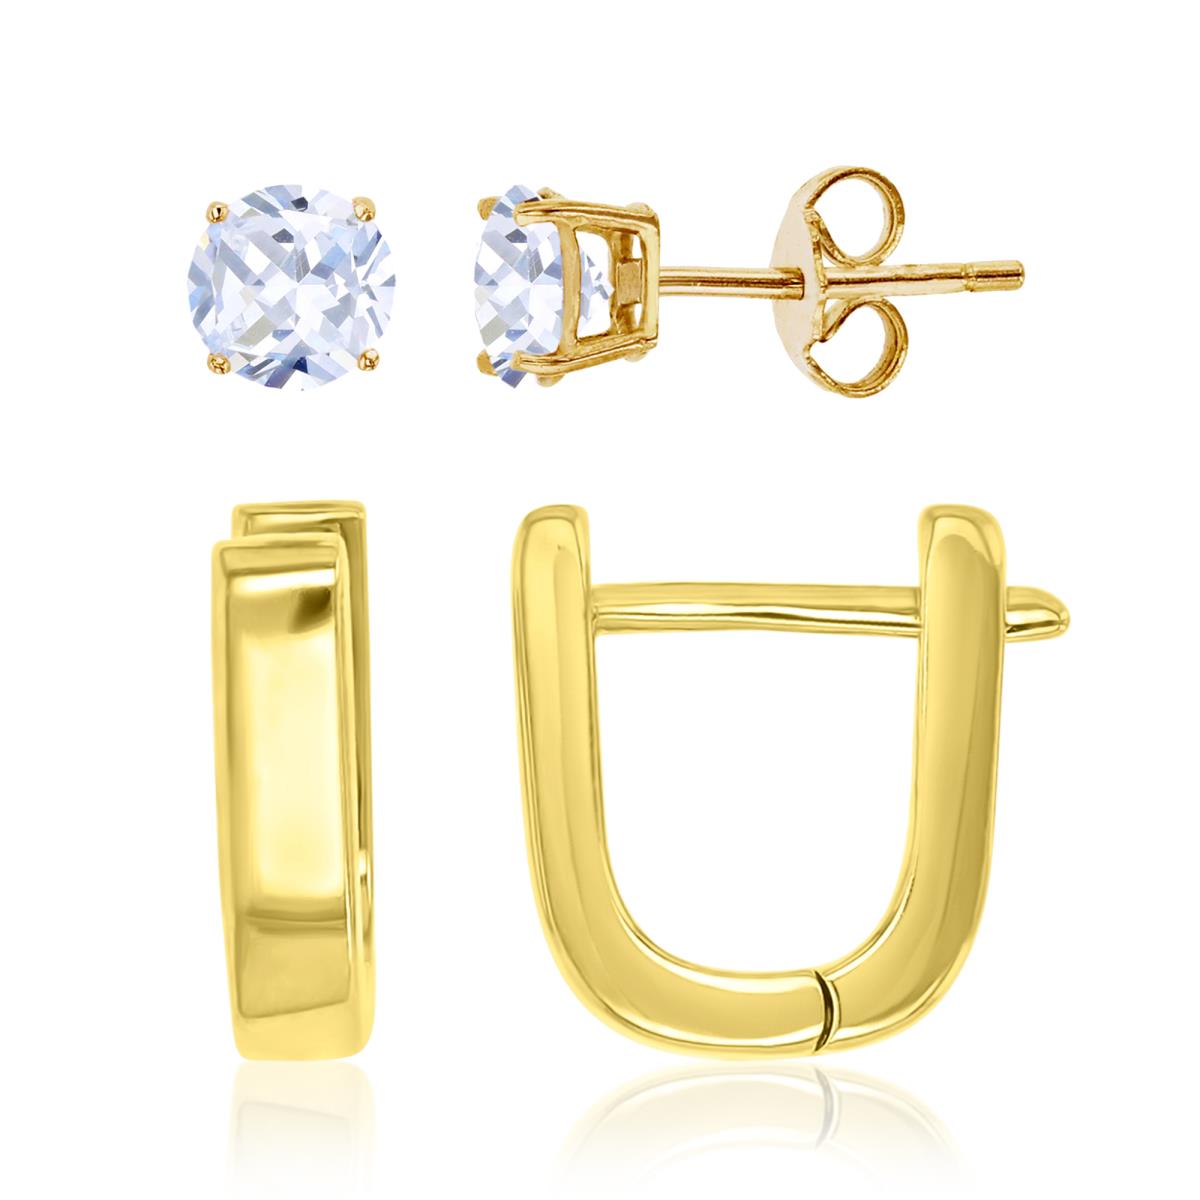 Sterling Silver Yellow 4.0mm Round White CZ Solitaire & 3x12mm Small Oval Huggie Earrings Set